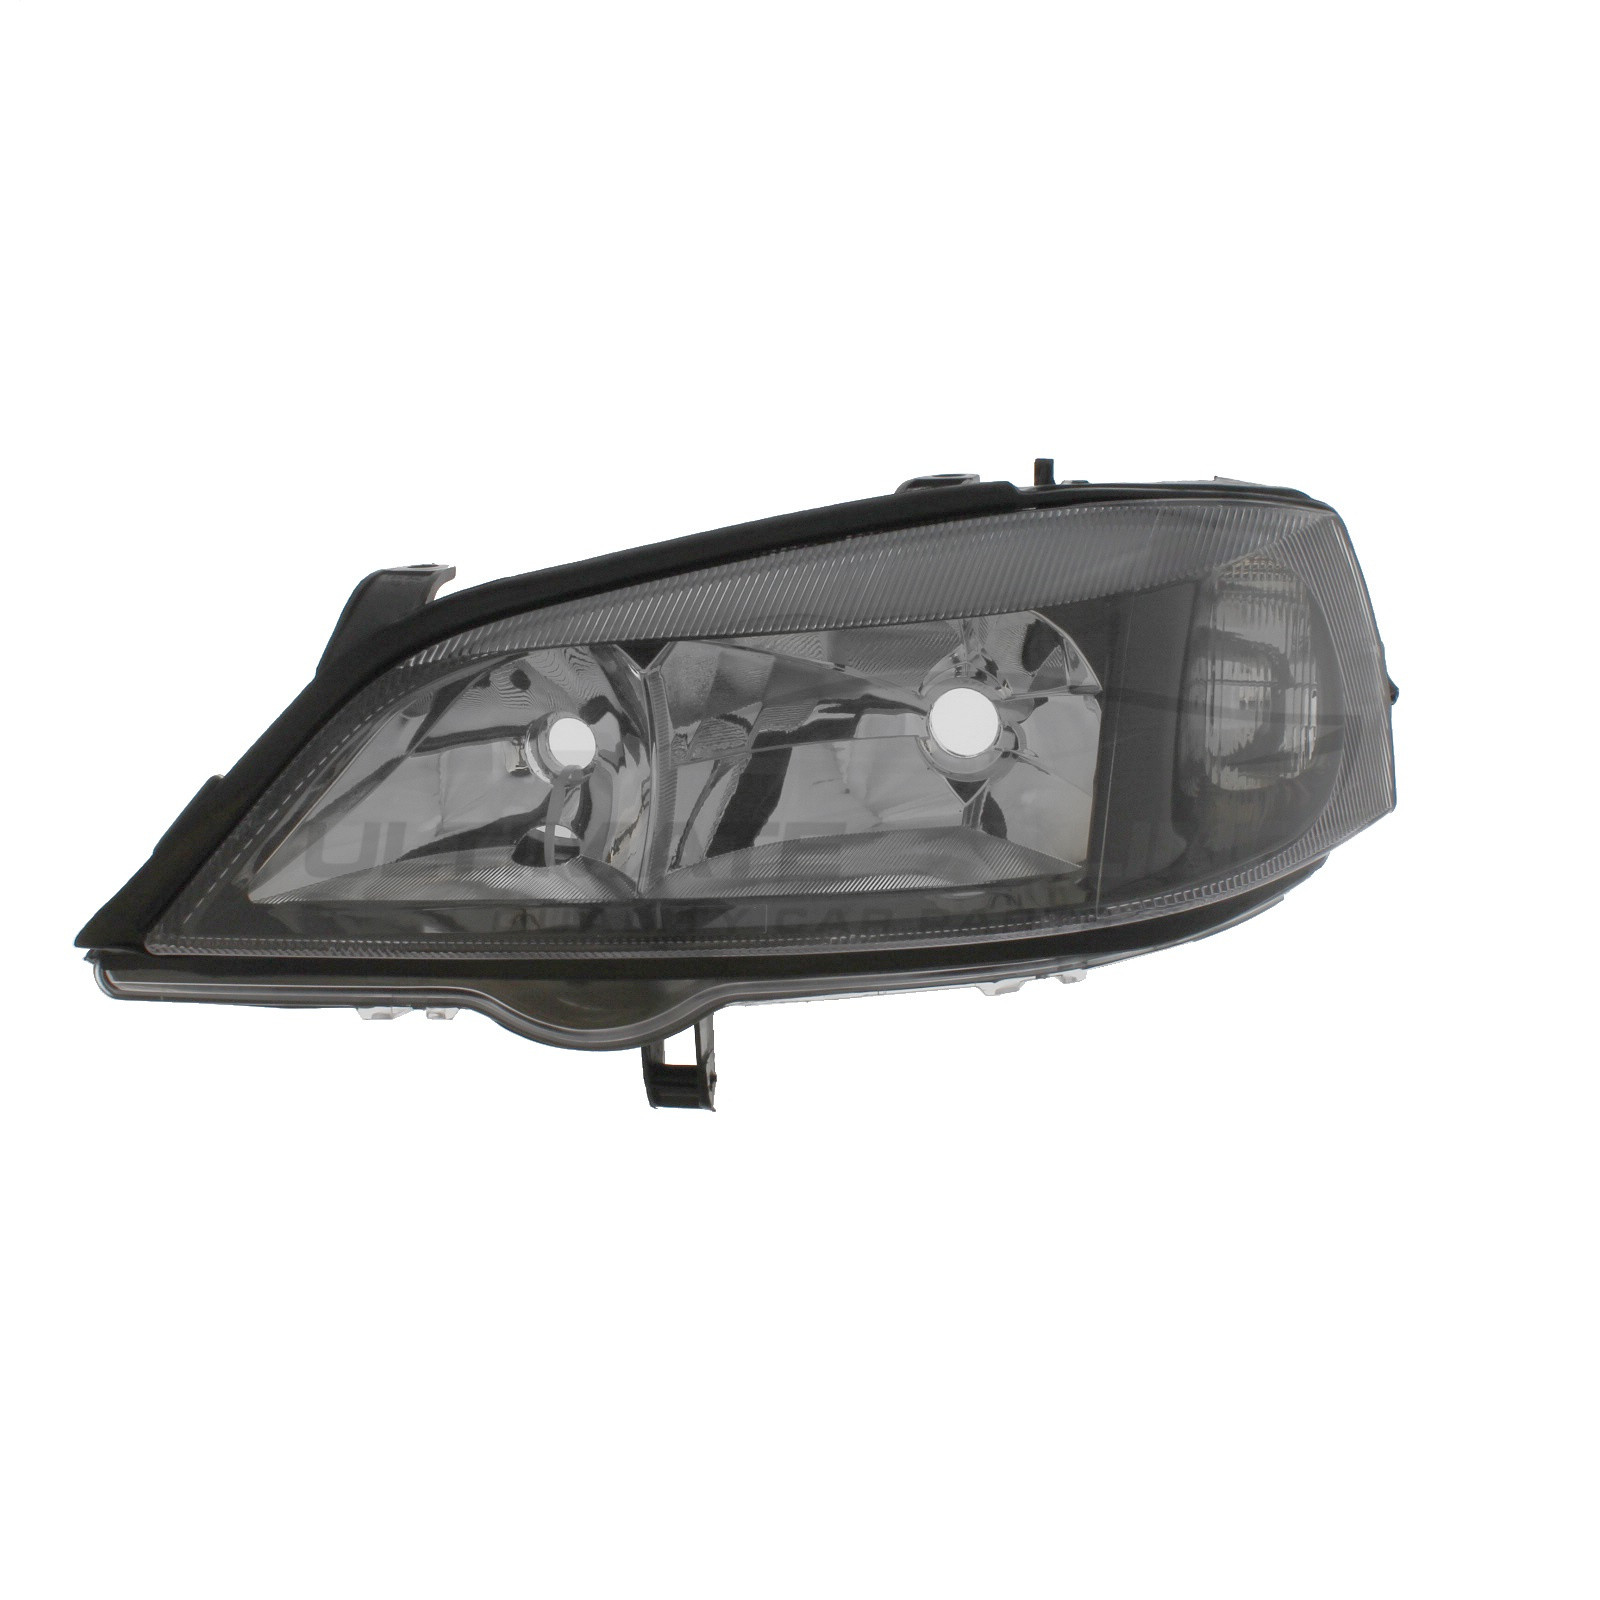 Vauxhall Astra G 1998-2004 Halogen, Electric Without Motor, Headlight / Headlamp with Black Surround Passengers Side (LH)